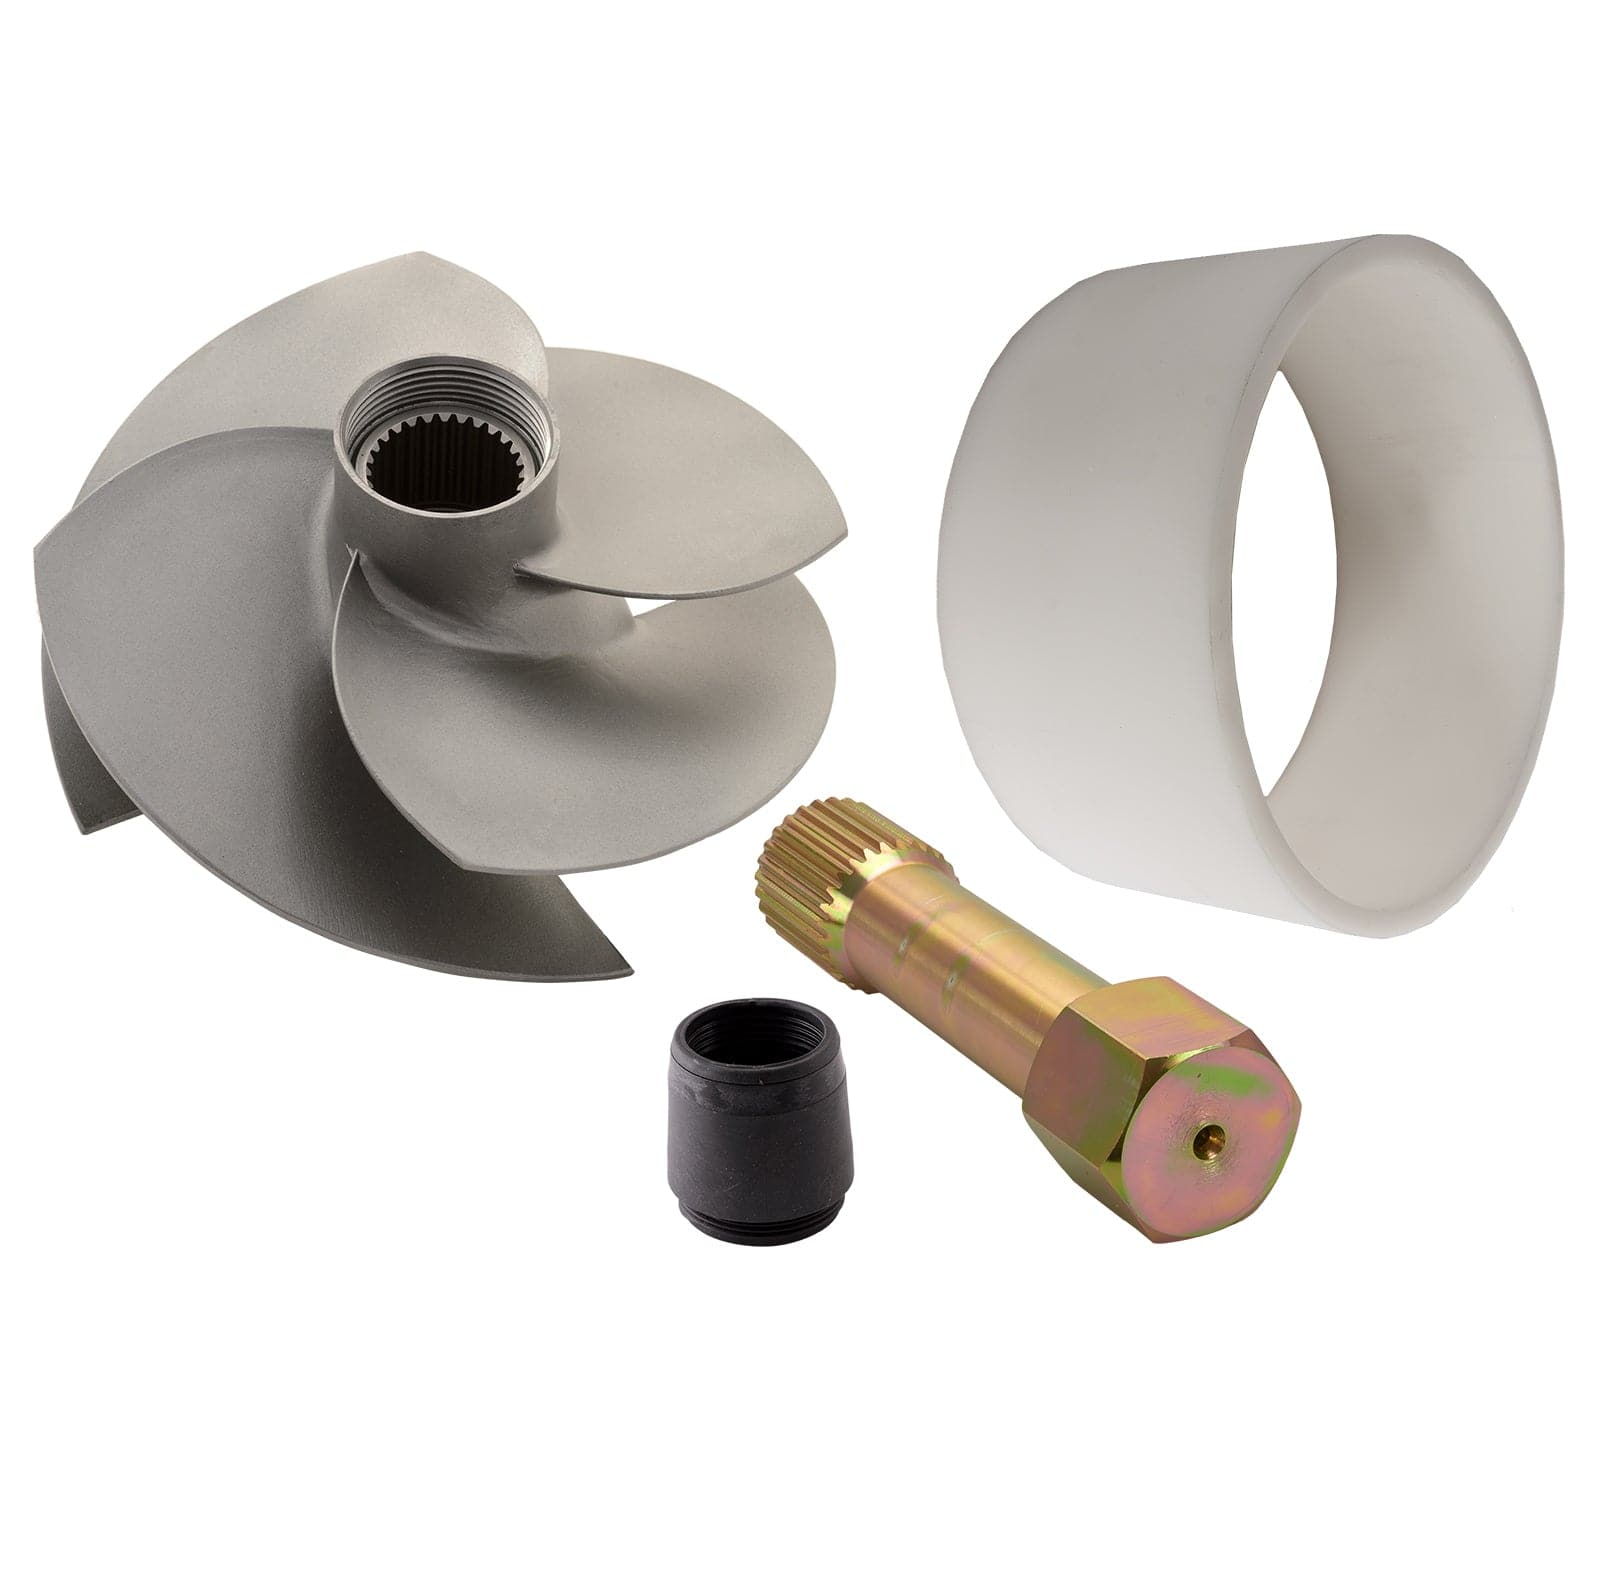 Impeller Solutions Impeller kit for Sea-Doo RXP-X 255/260 RXT 260/X/iS/AS GTX LTD iS 2009-2015